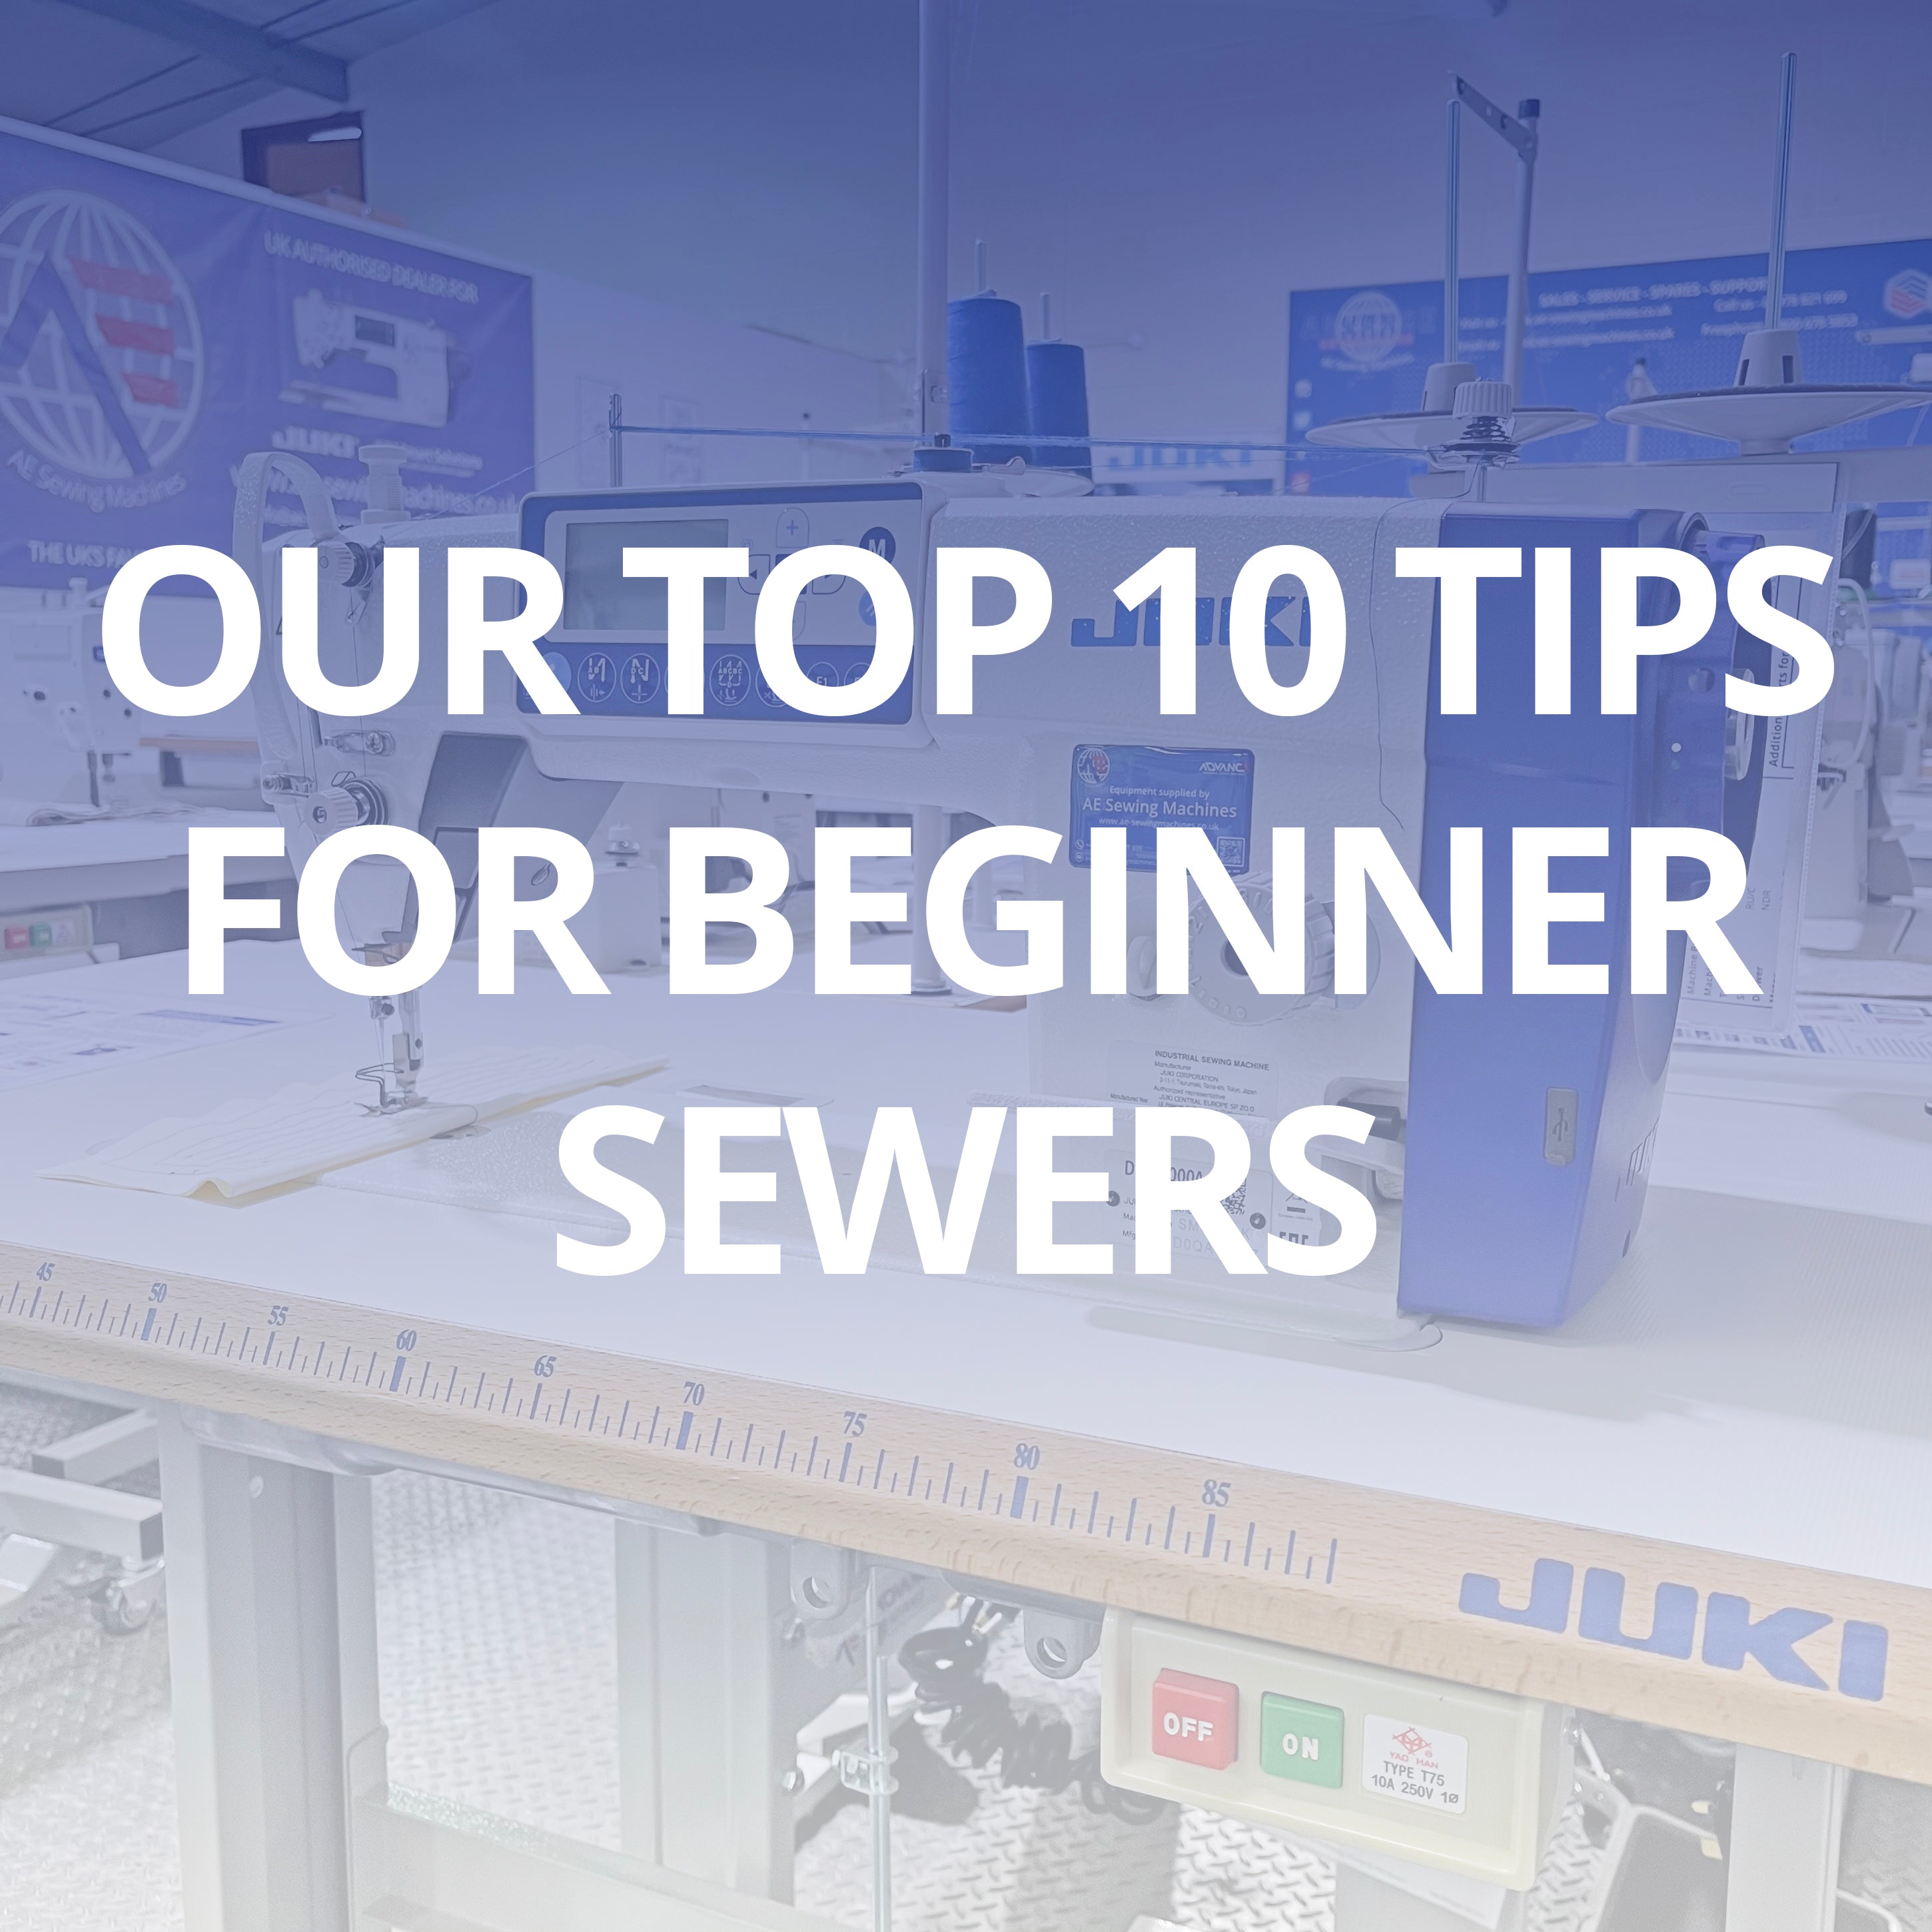 Our top 10 tips for beginner sewers!